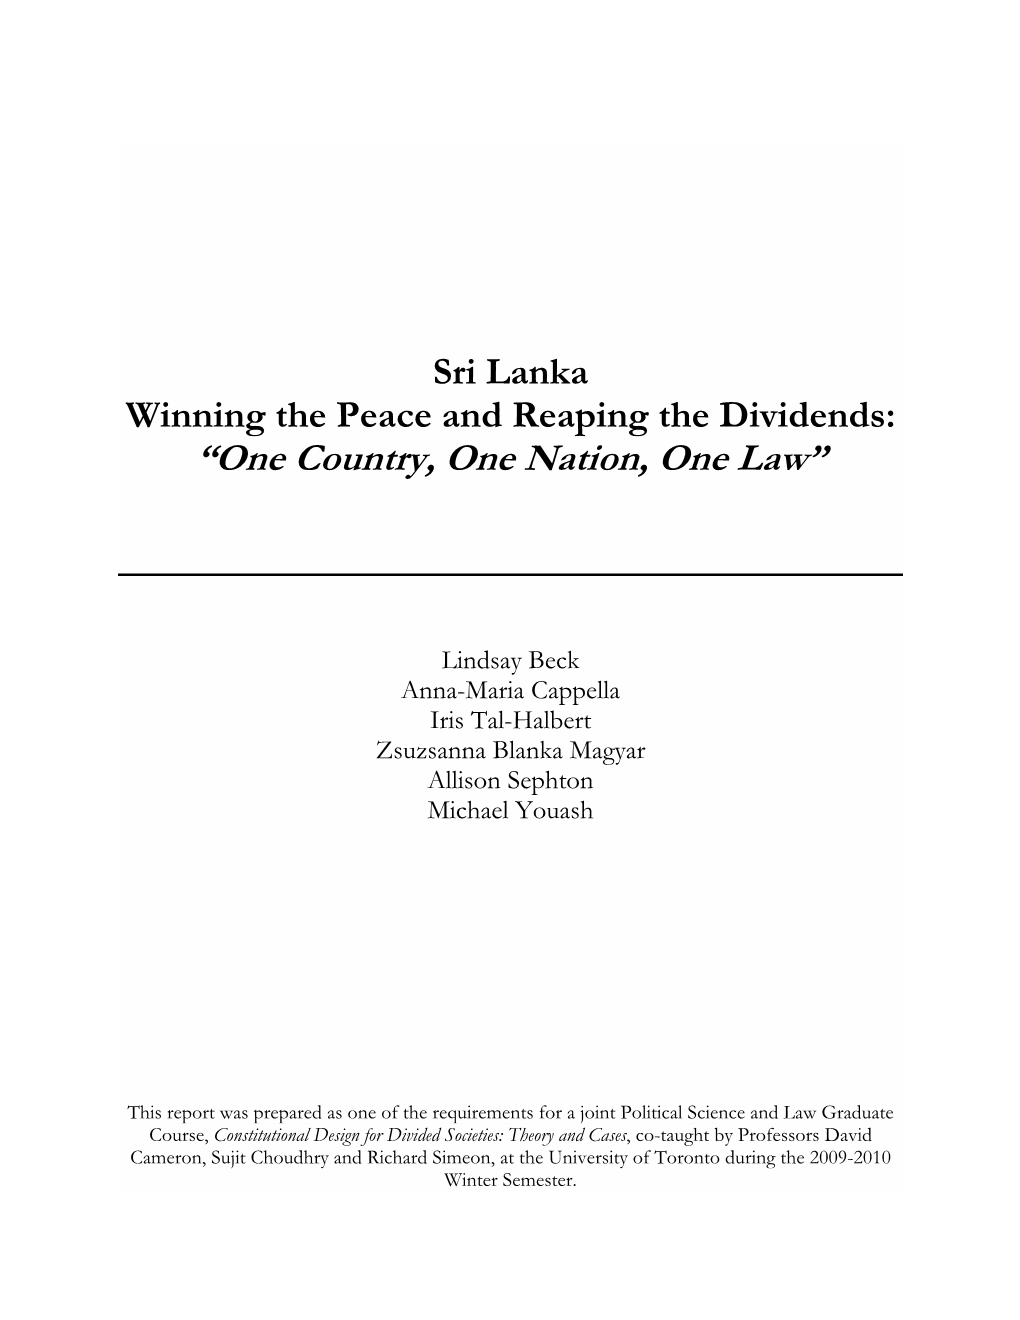 Sri Lanka Winning the Peace and Reaping the Dividends: “One Country, One Nation, One Law”